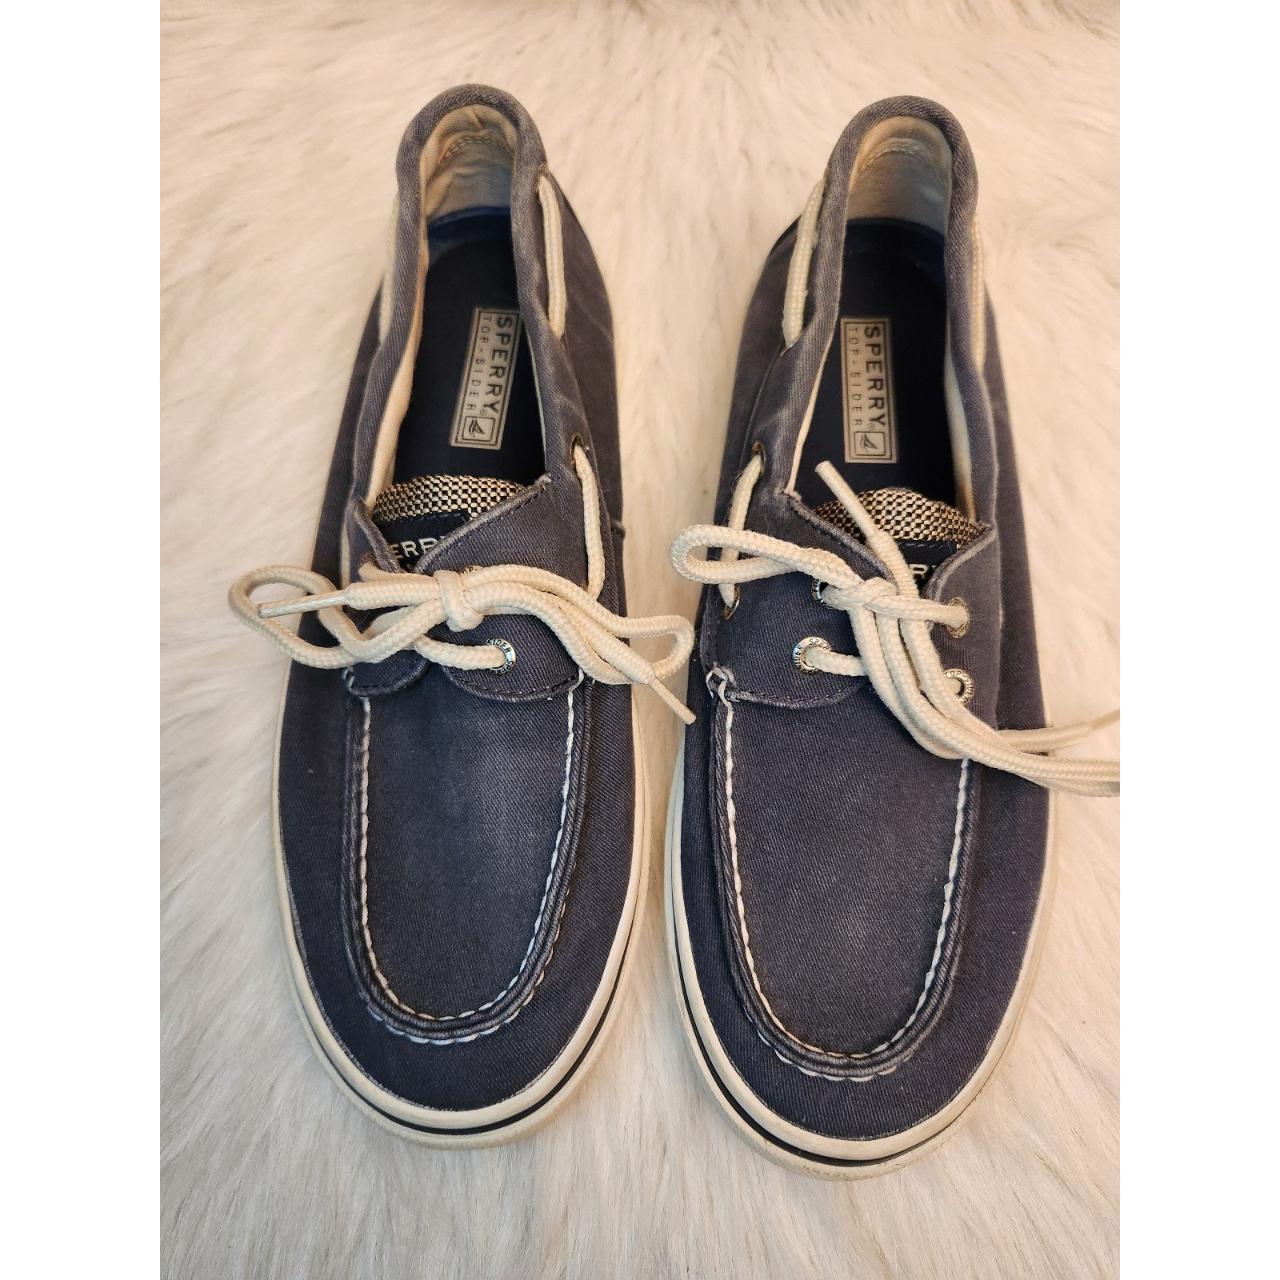 Sperry Halyard Boat Shoes Mens Size 9 Sperry... - Depop